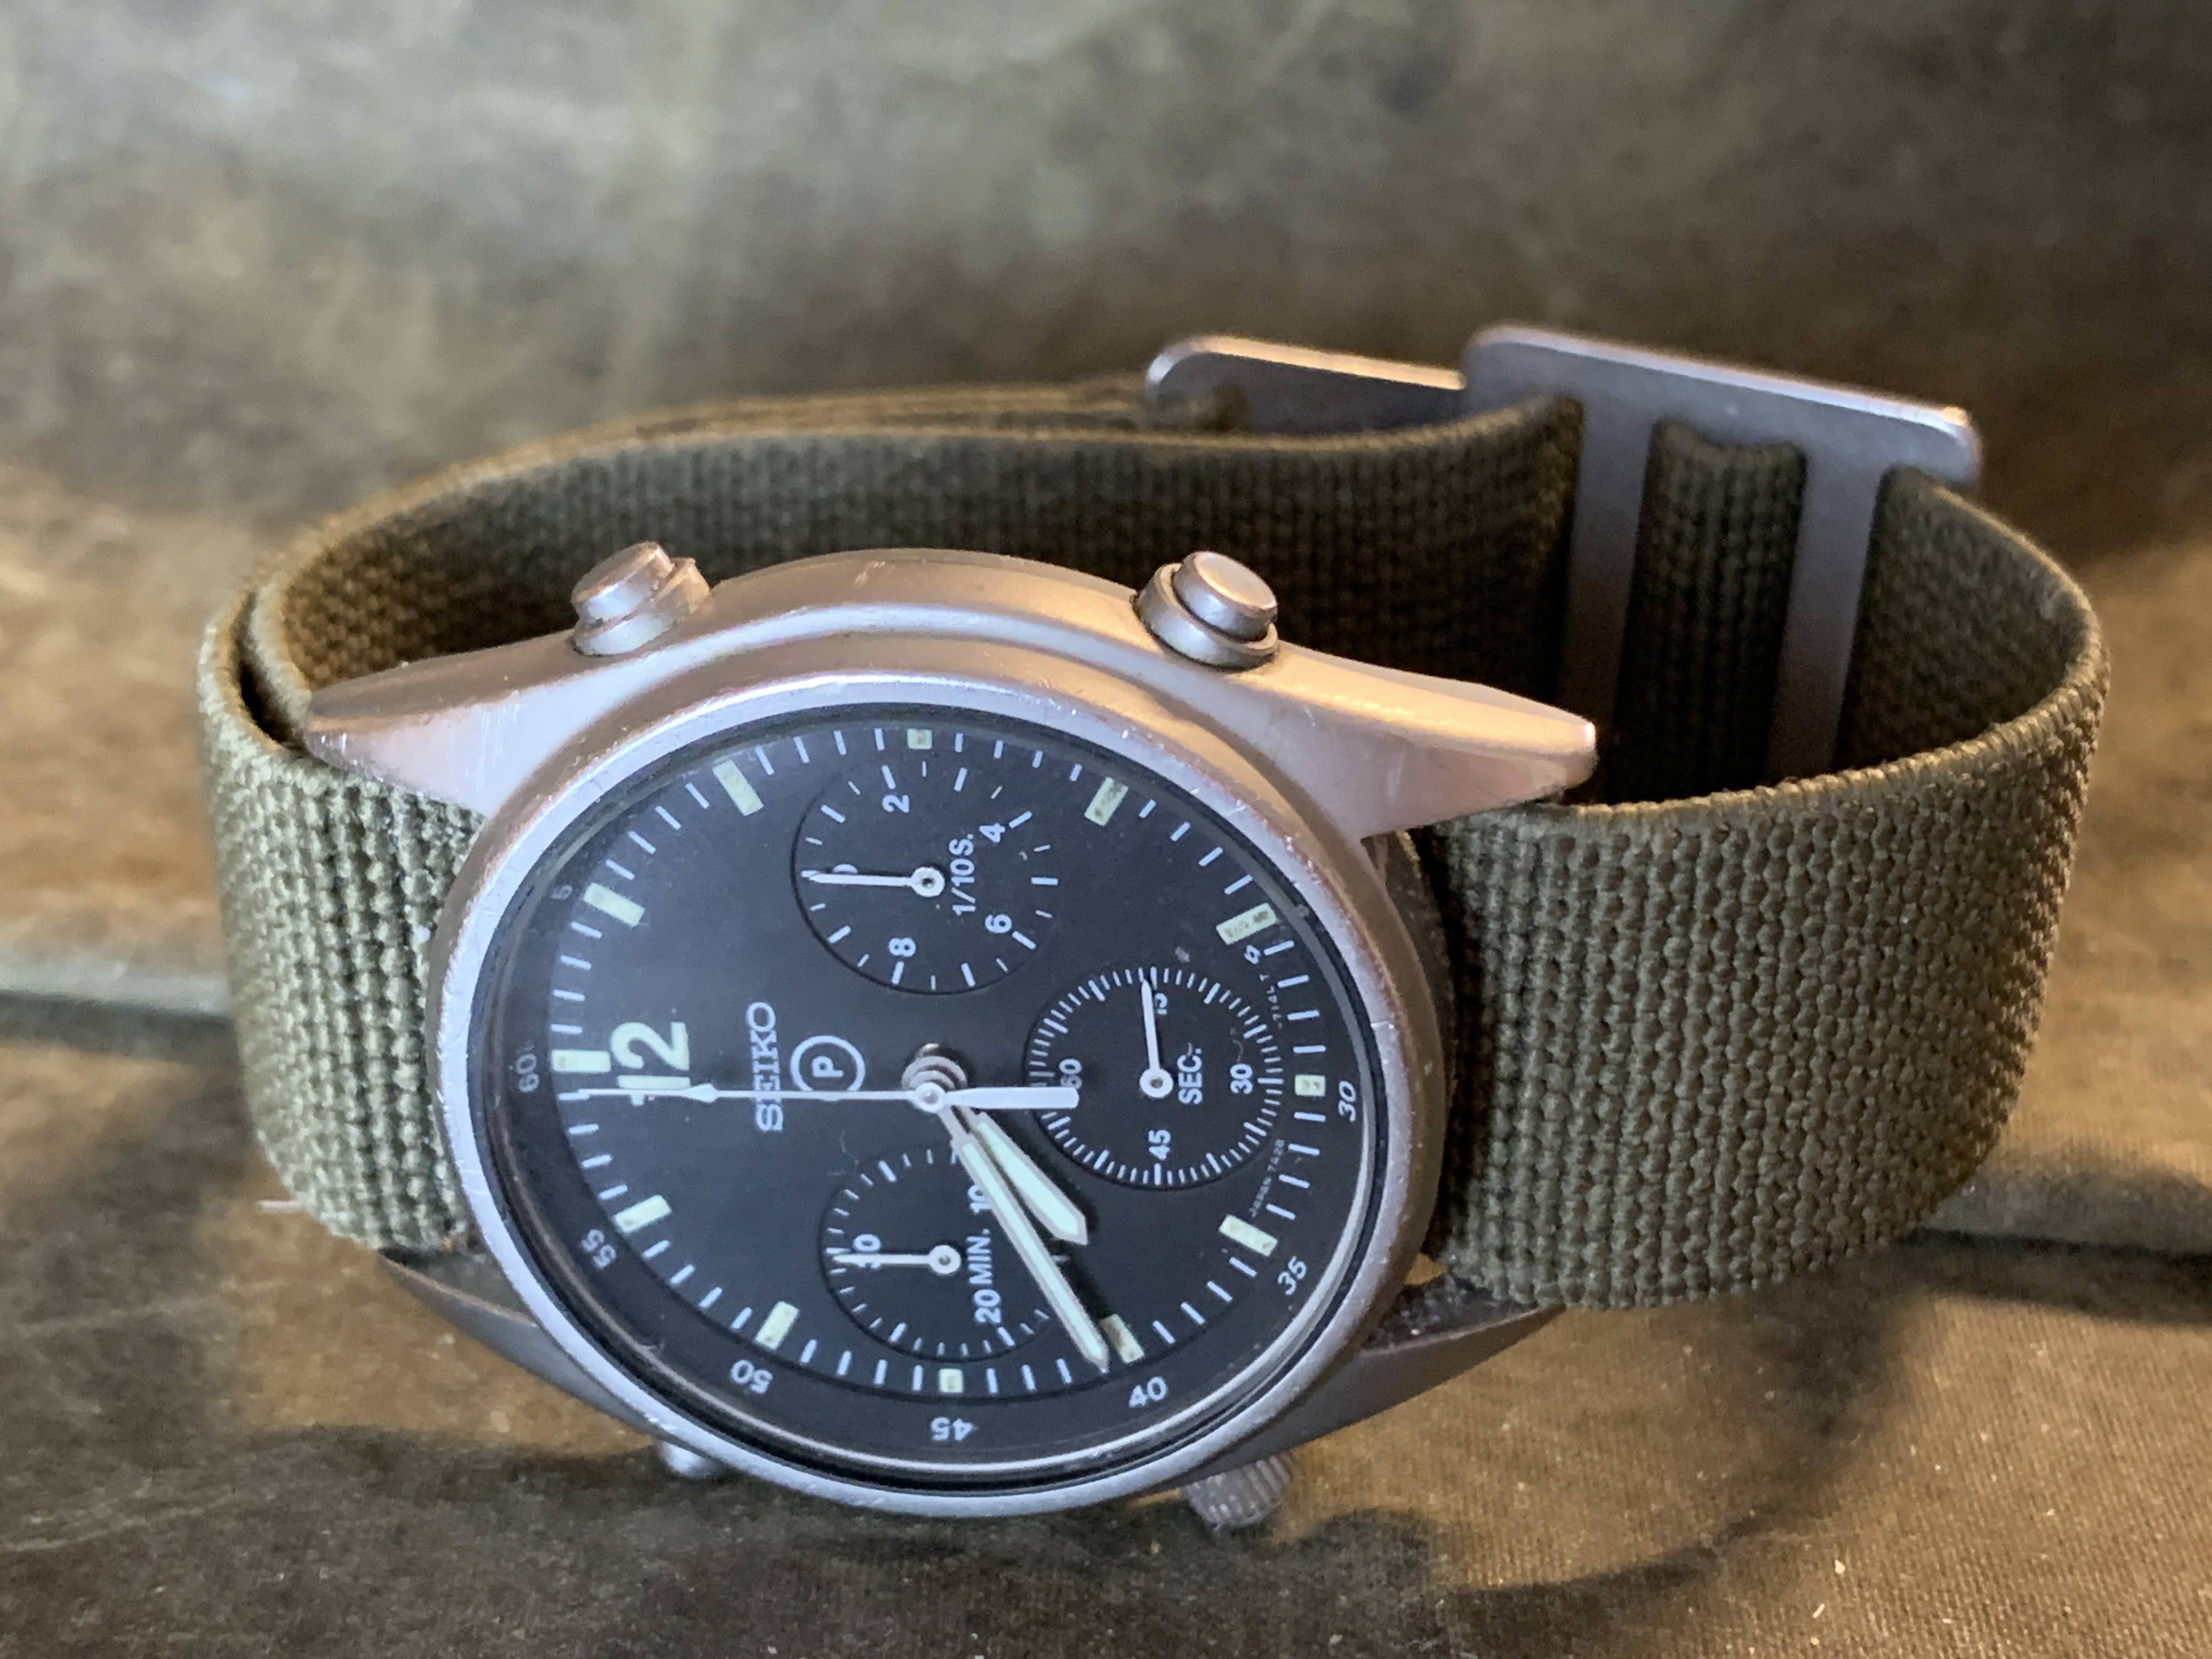 Harry's Vintage Seiko Blog: Seiko Gen 1 (1st Generation) 7A28-7120 Royal  Air Force flight crew issued military analog chronograph